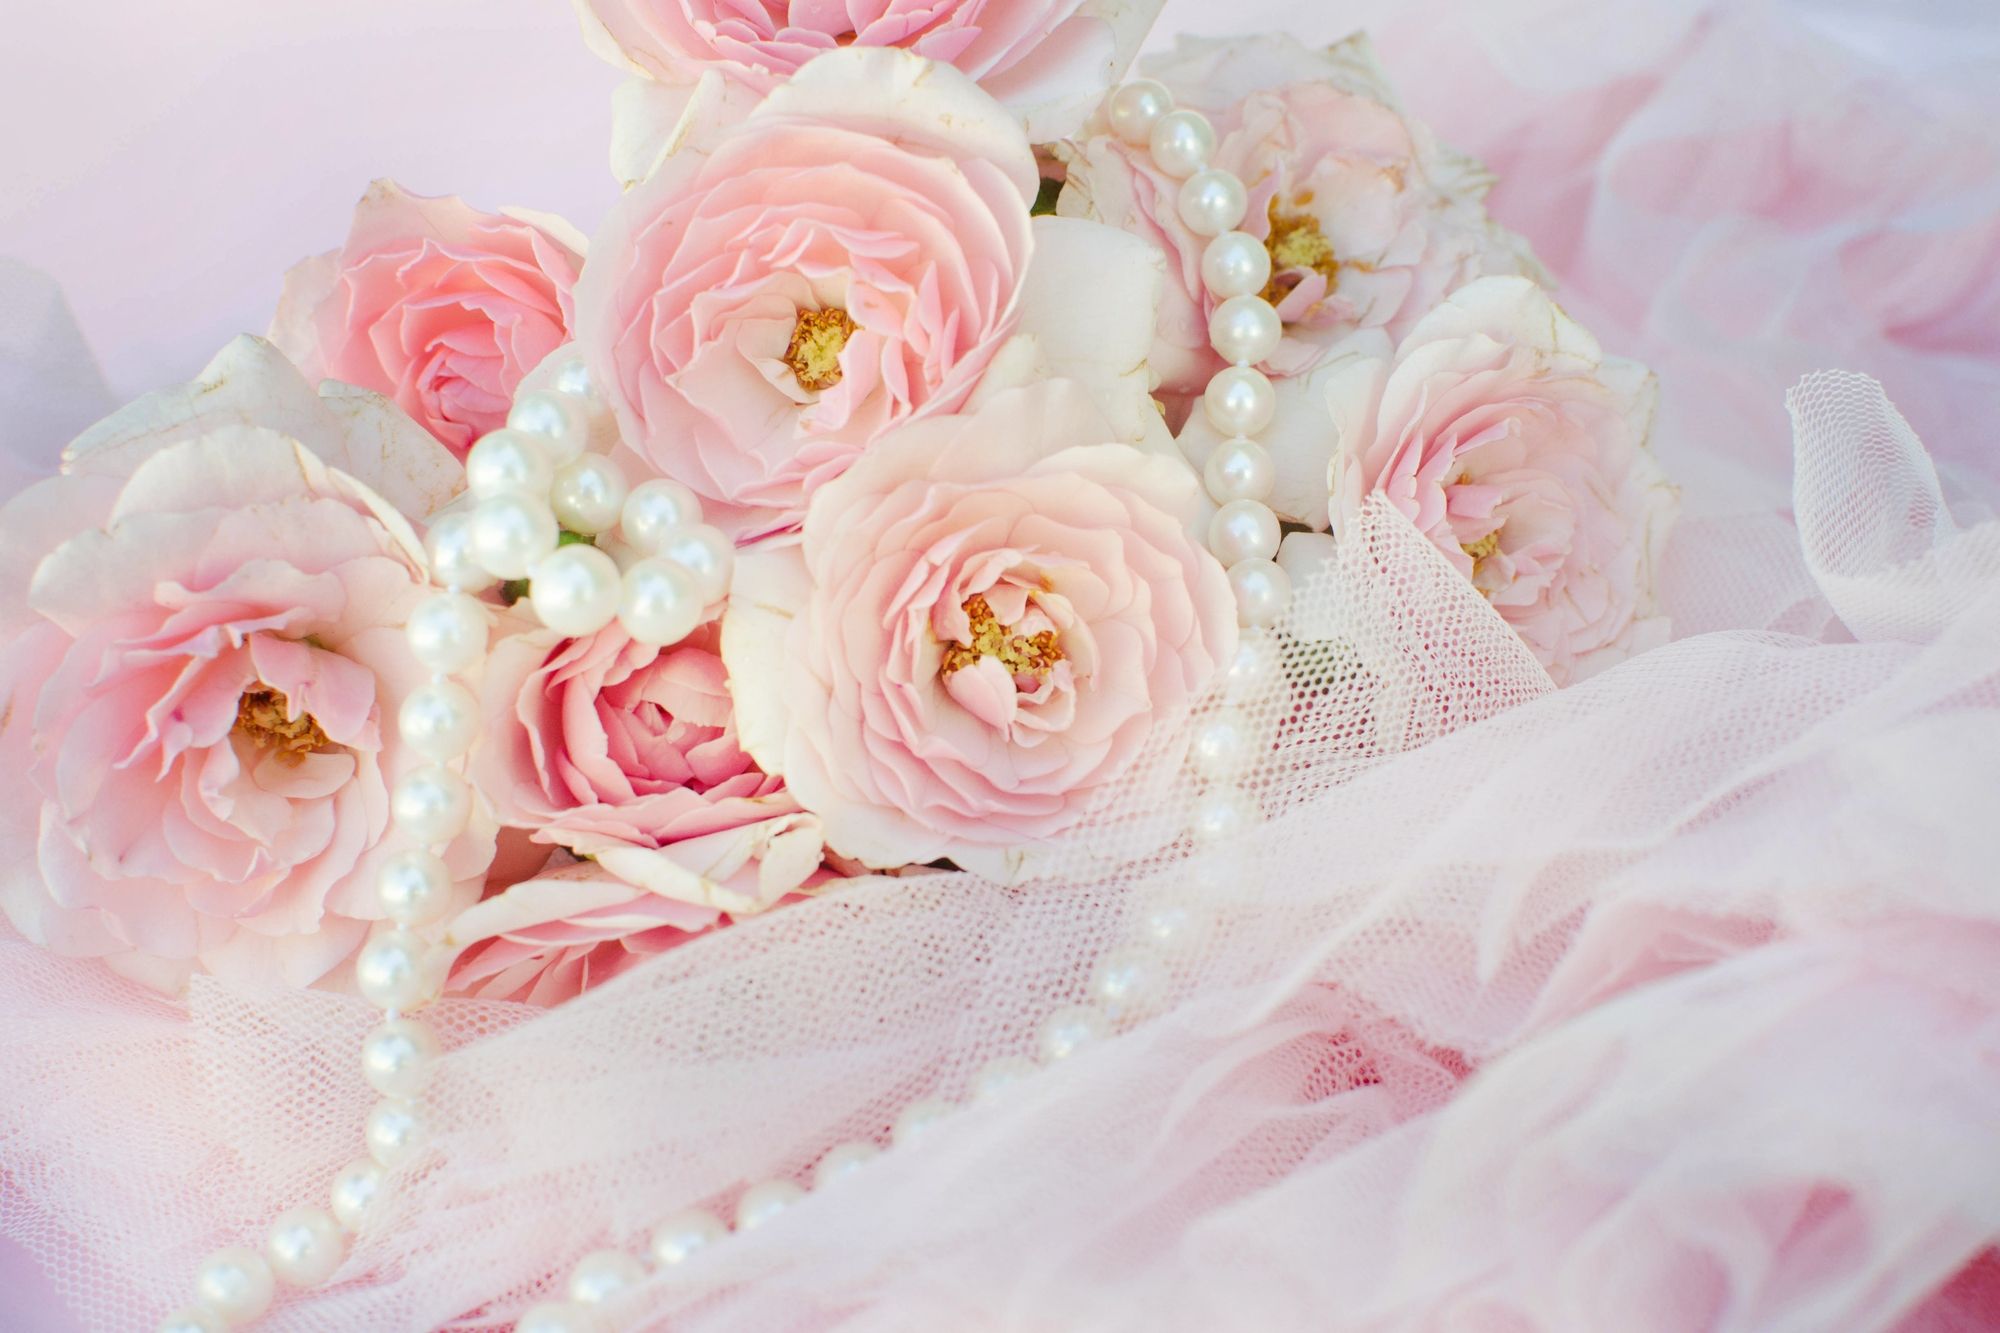 Pink Roses With Pearls - HD Wallpaper 